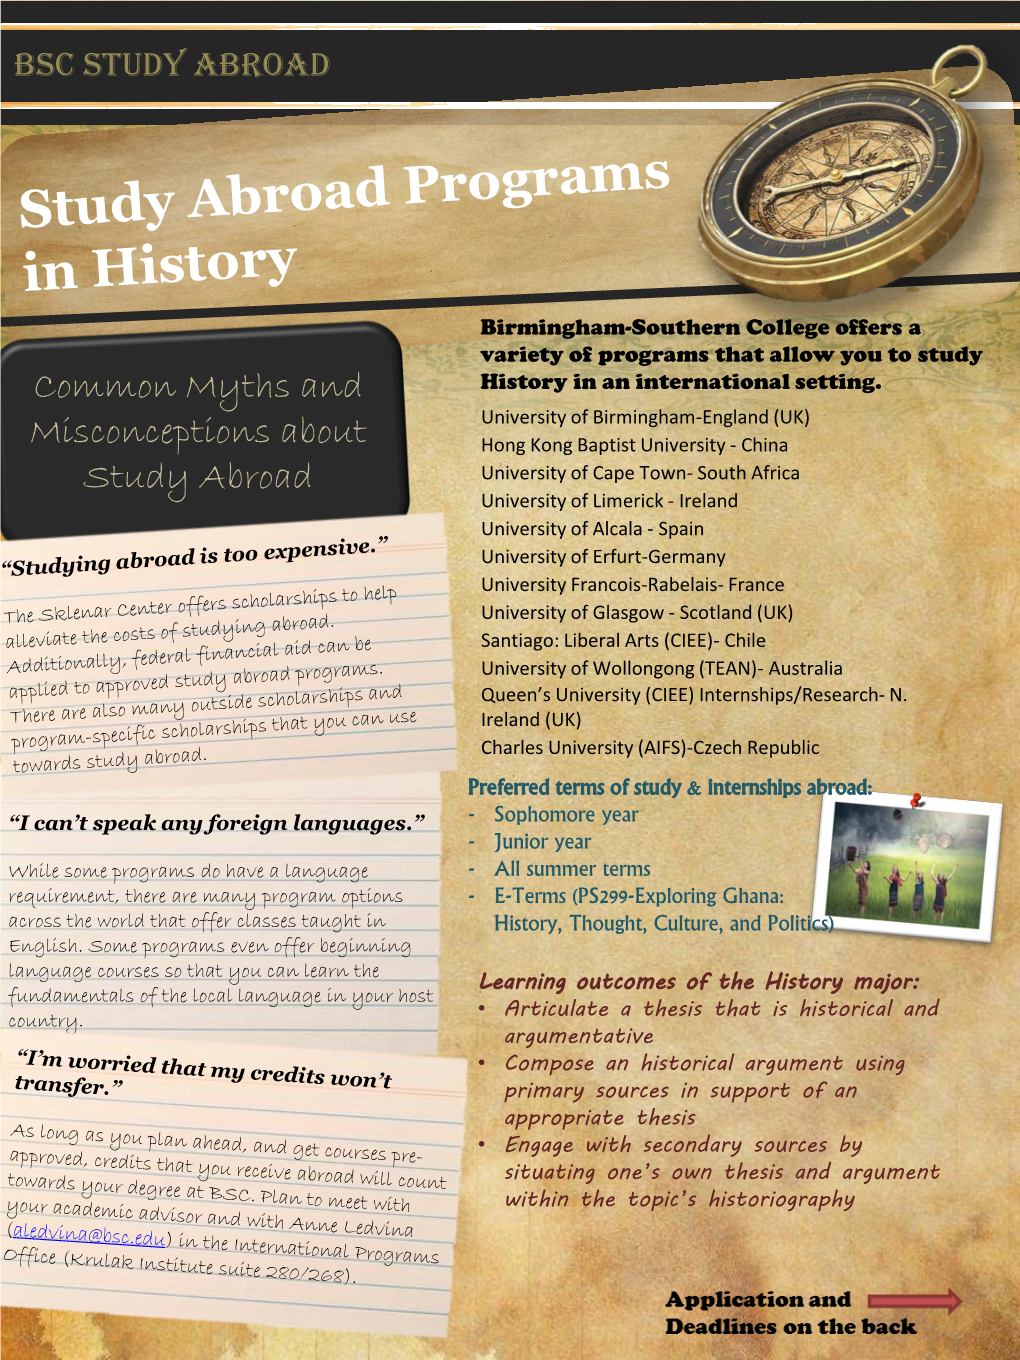 Common Myths and Misconceptions About Study Abroad